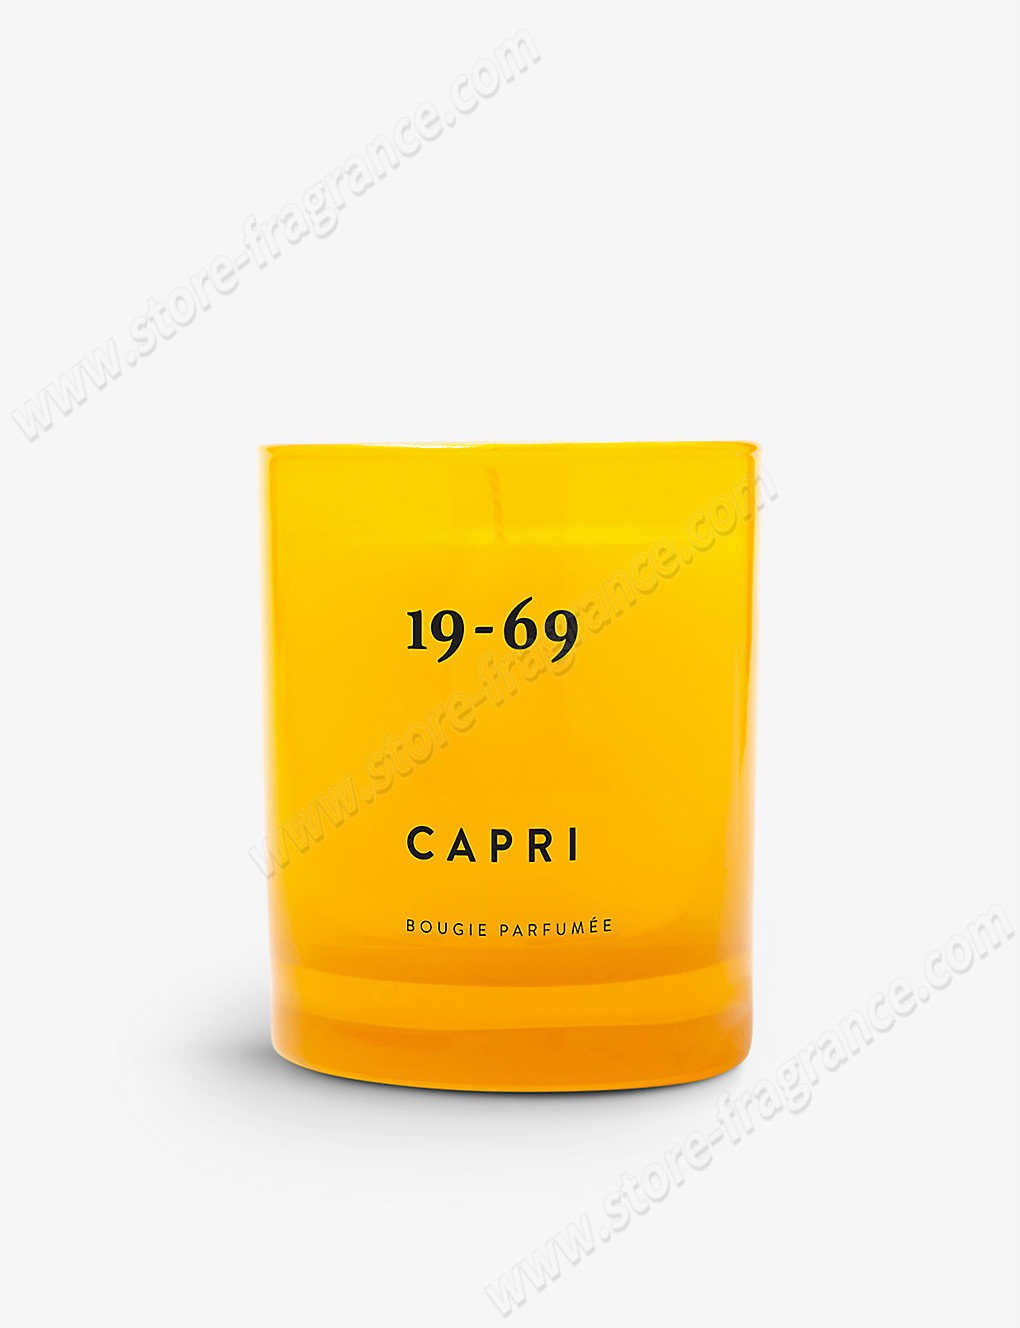 19-69/Capri vegetable-wax scented candle 200ml ✿ Discount Store - 19-69/Capri vegetable-wax scented candle 200ml ✿ Discount Store